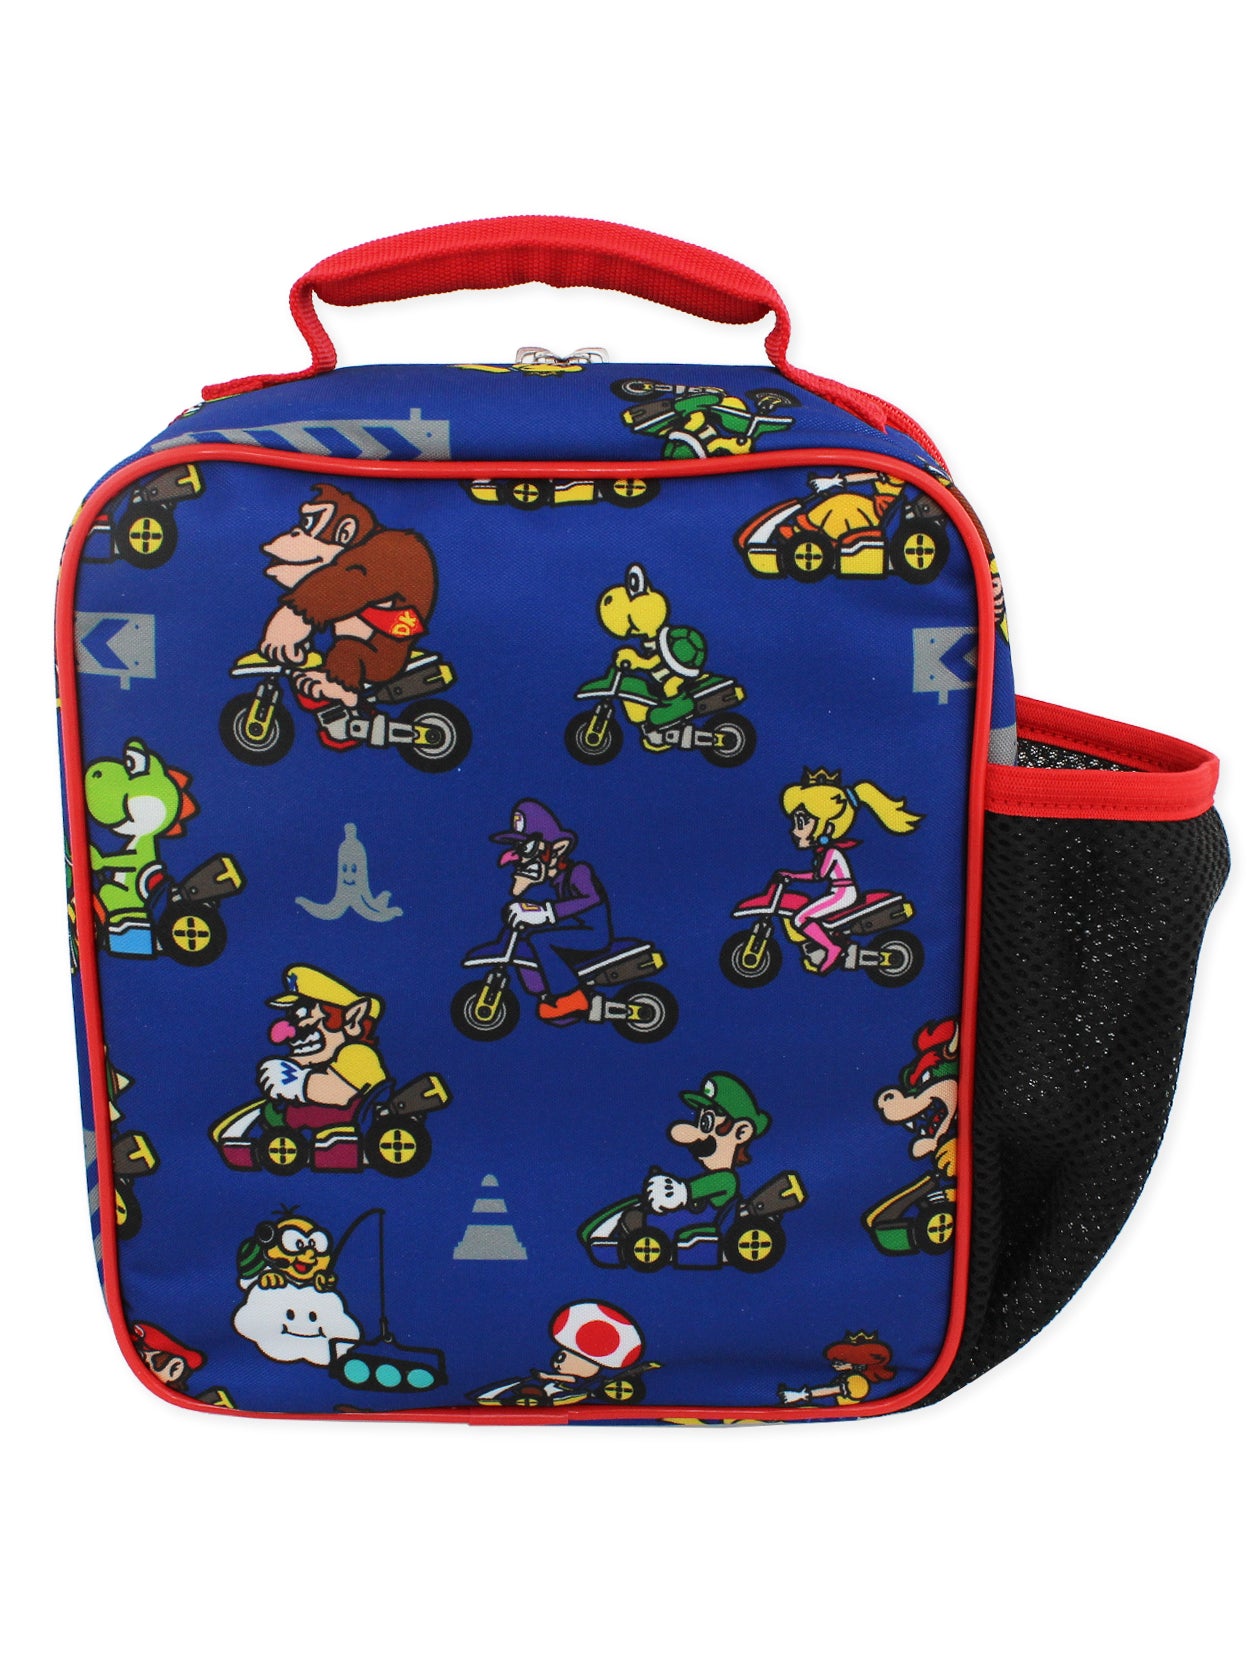 Super Mario Lunch Bag Kid's Insulated Lunch Box Waterproof, Black / No.5